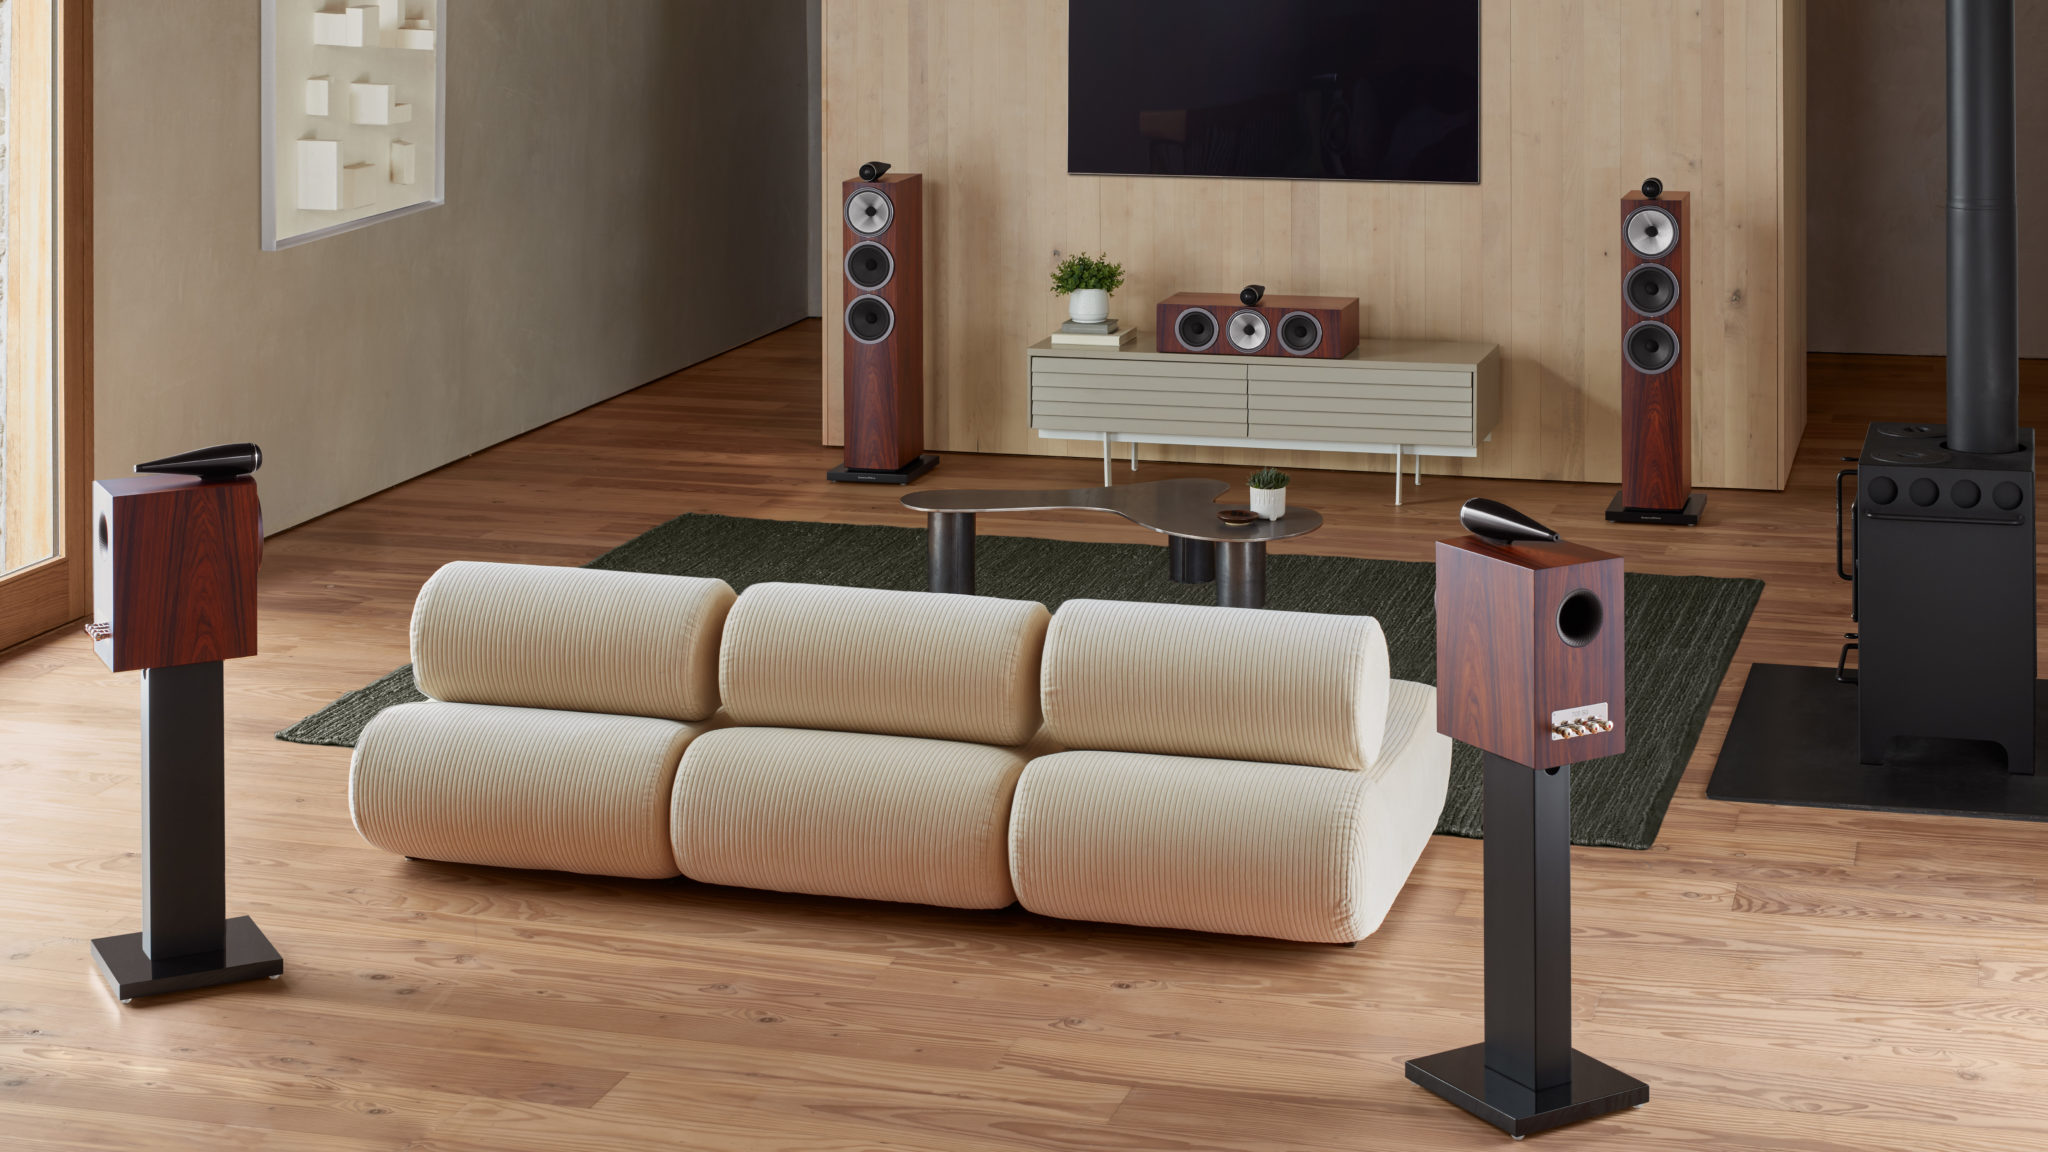 Bowers & Wilkins Releases All-New 700 Series Range